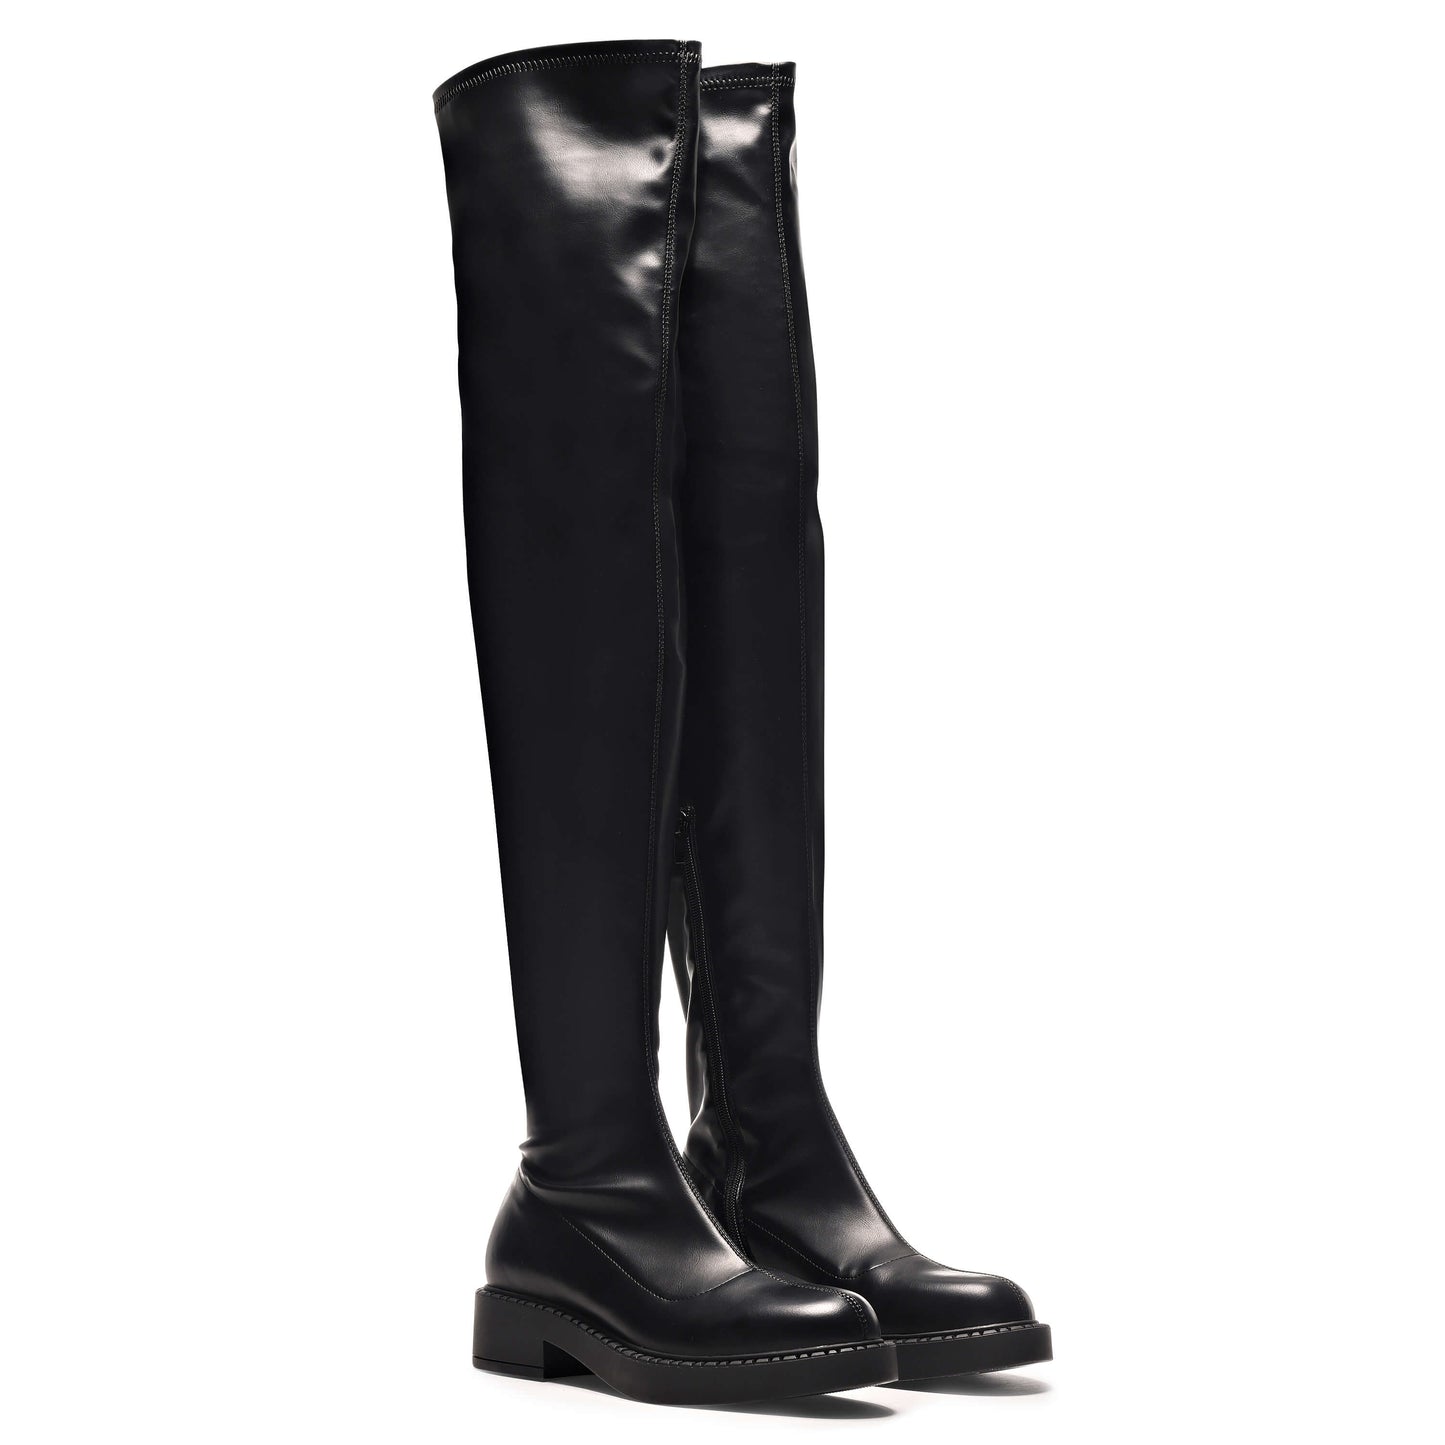 The Commander Plus Size Thigh High Boots - Long Boots - KOI Footwear - Black - Three-Quarter View